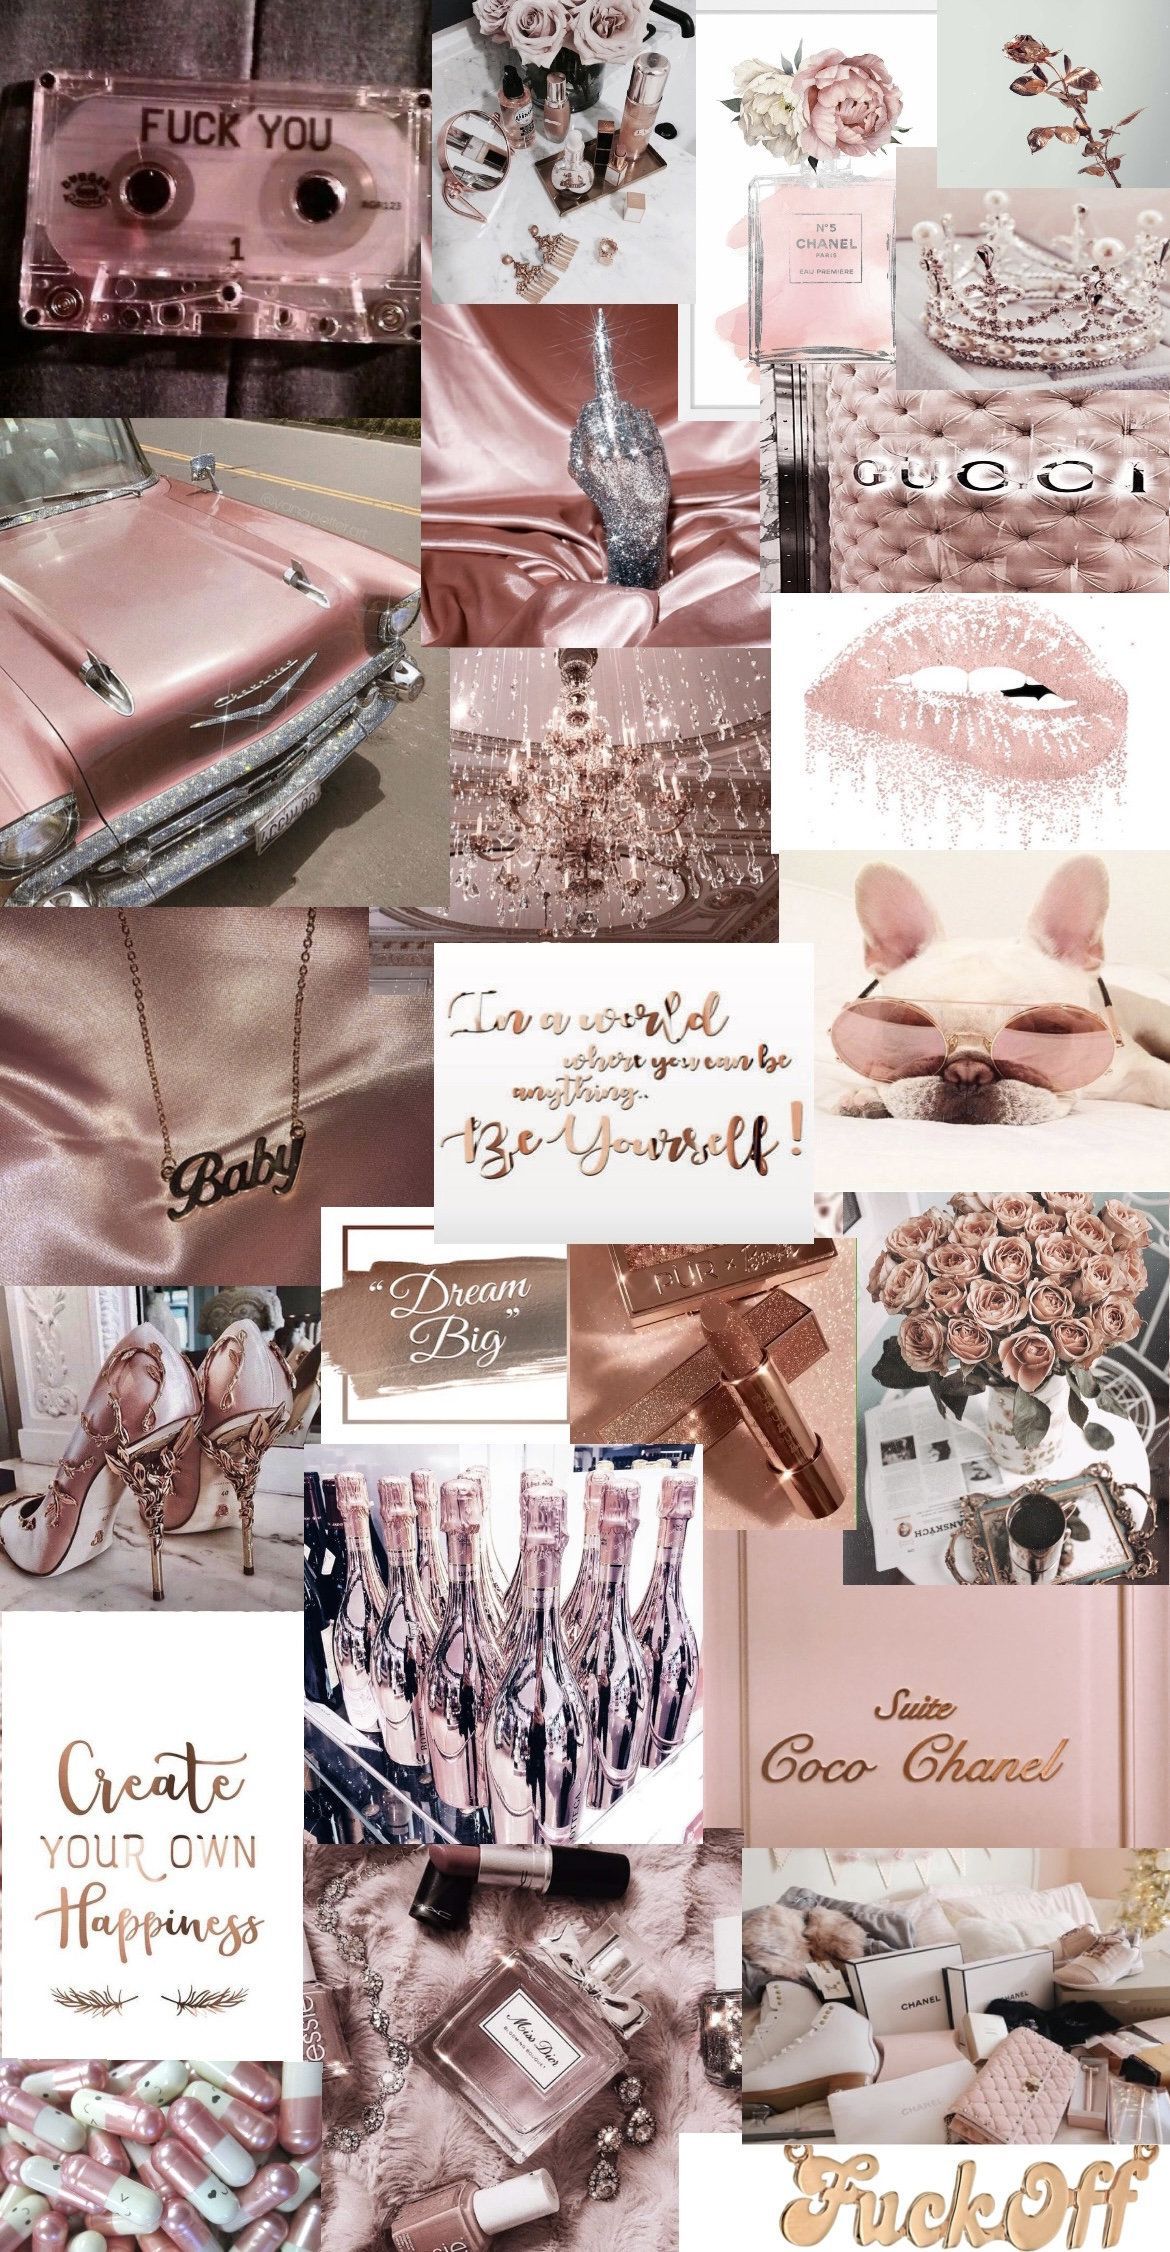 Aesthetic collage of rose gold and pink photos with inspirational quotes - Rose gold, chocolate, roses